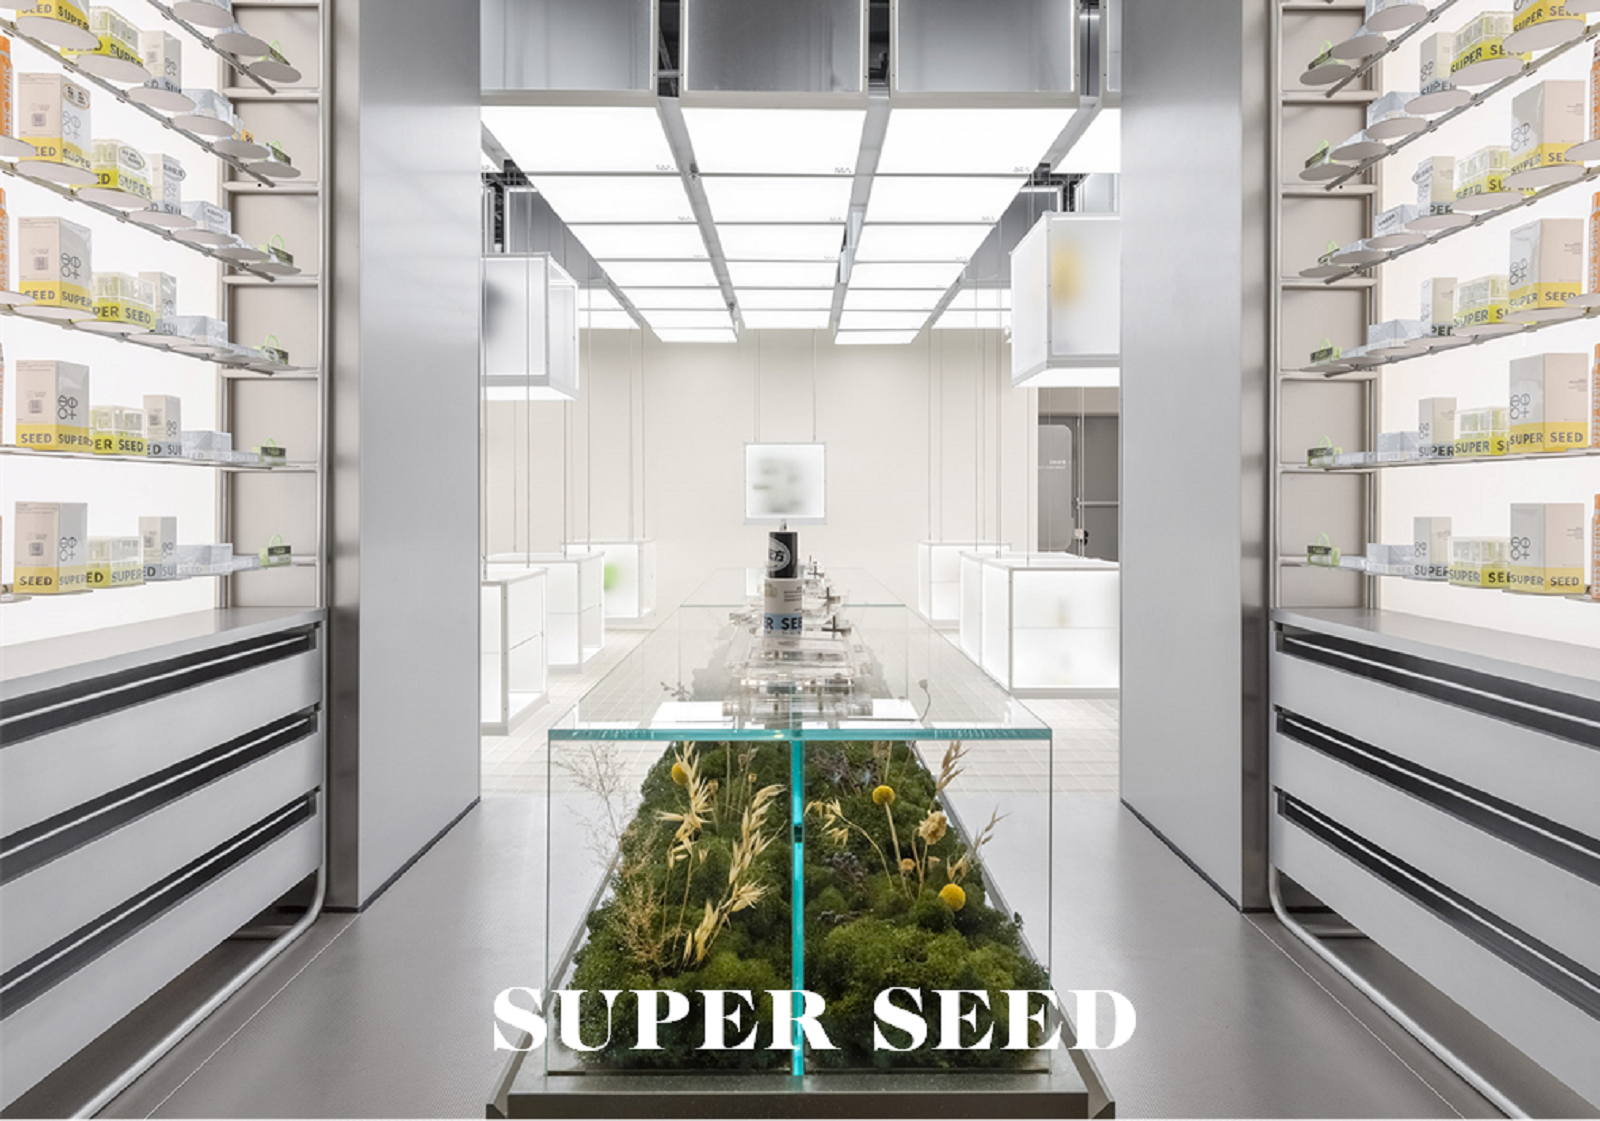 MISSIONS MMM_STORE TOUR INNOVATION_SUPERSEEDS_00